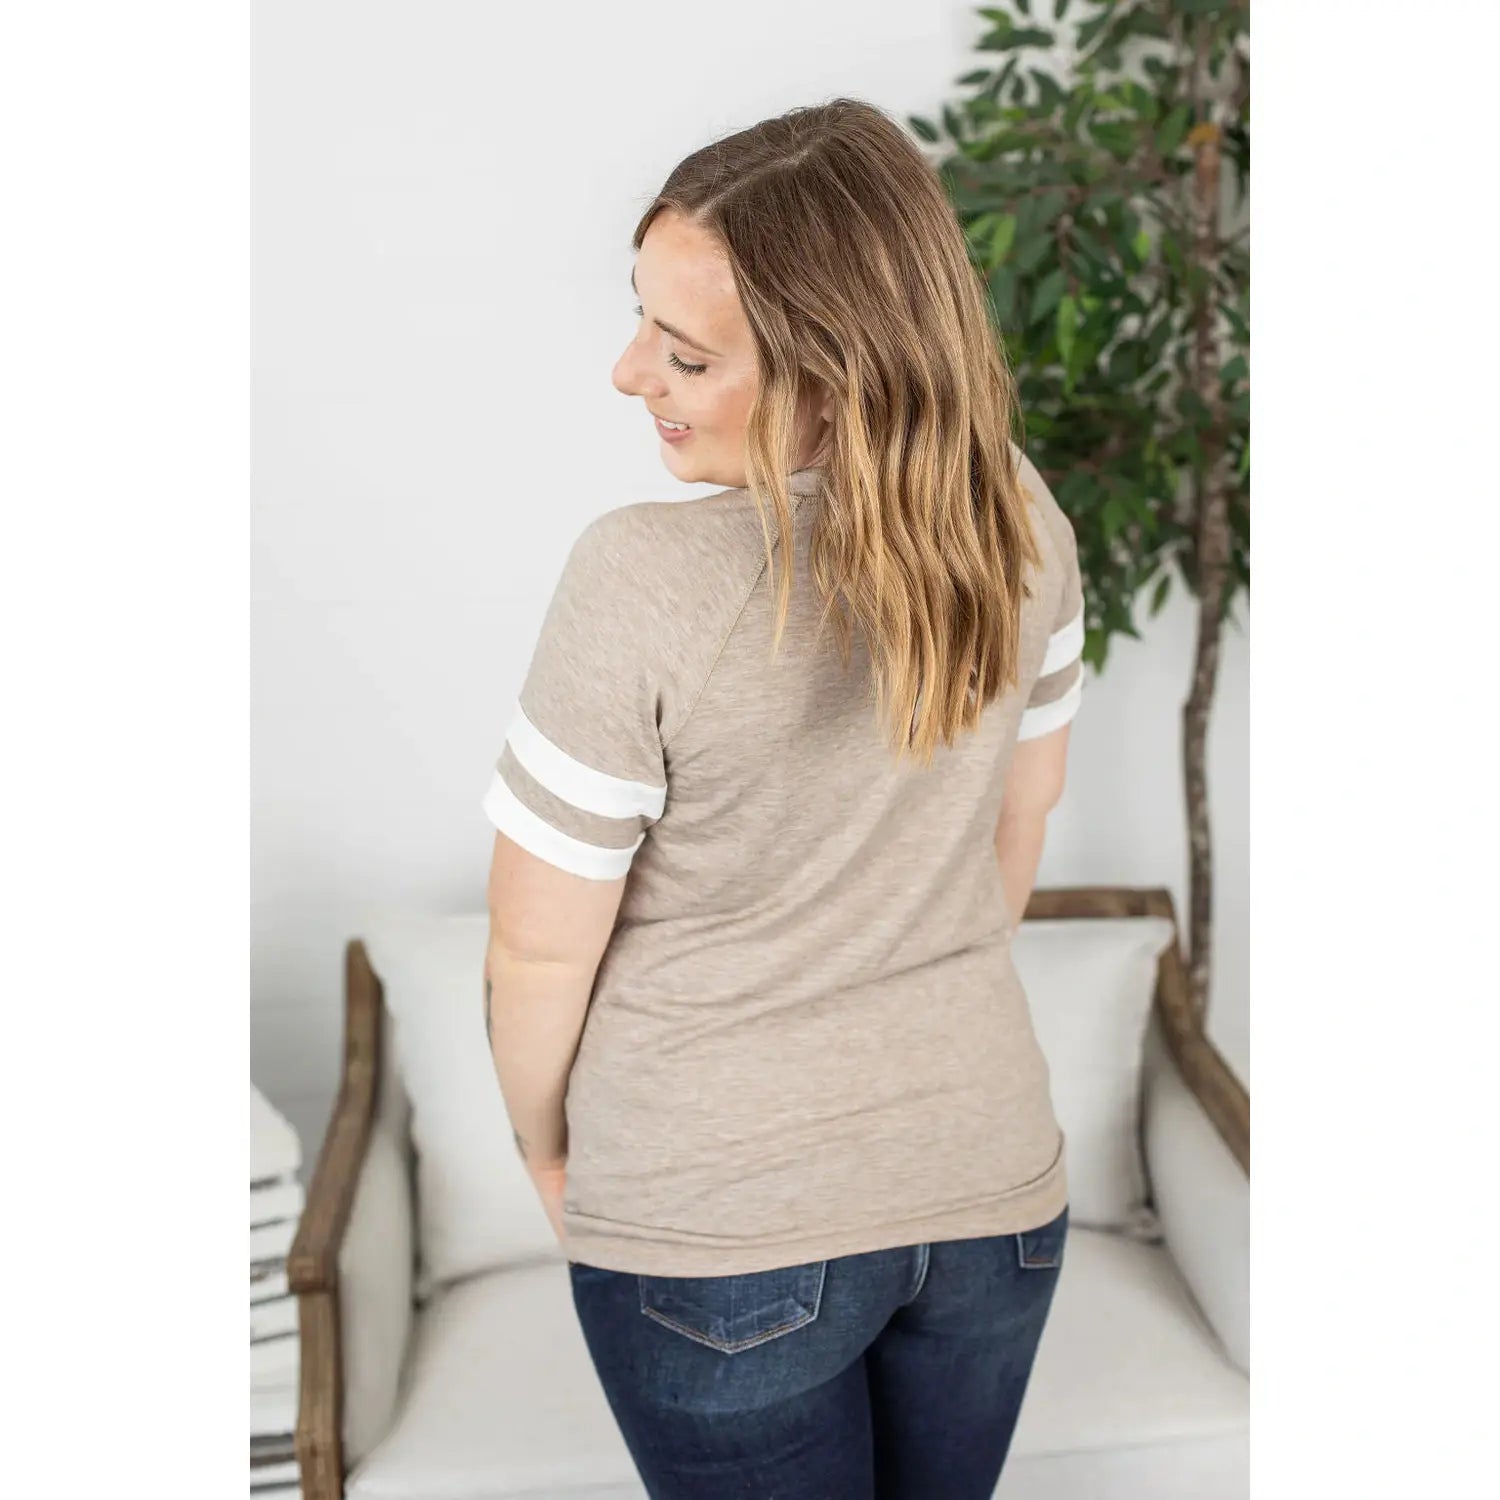 Sports Tee Tan with  White Stripes on Sleeves